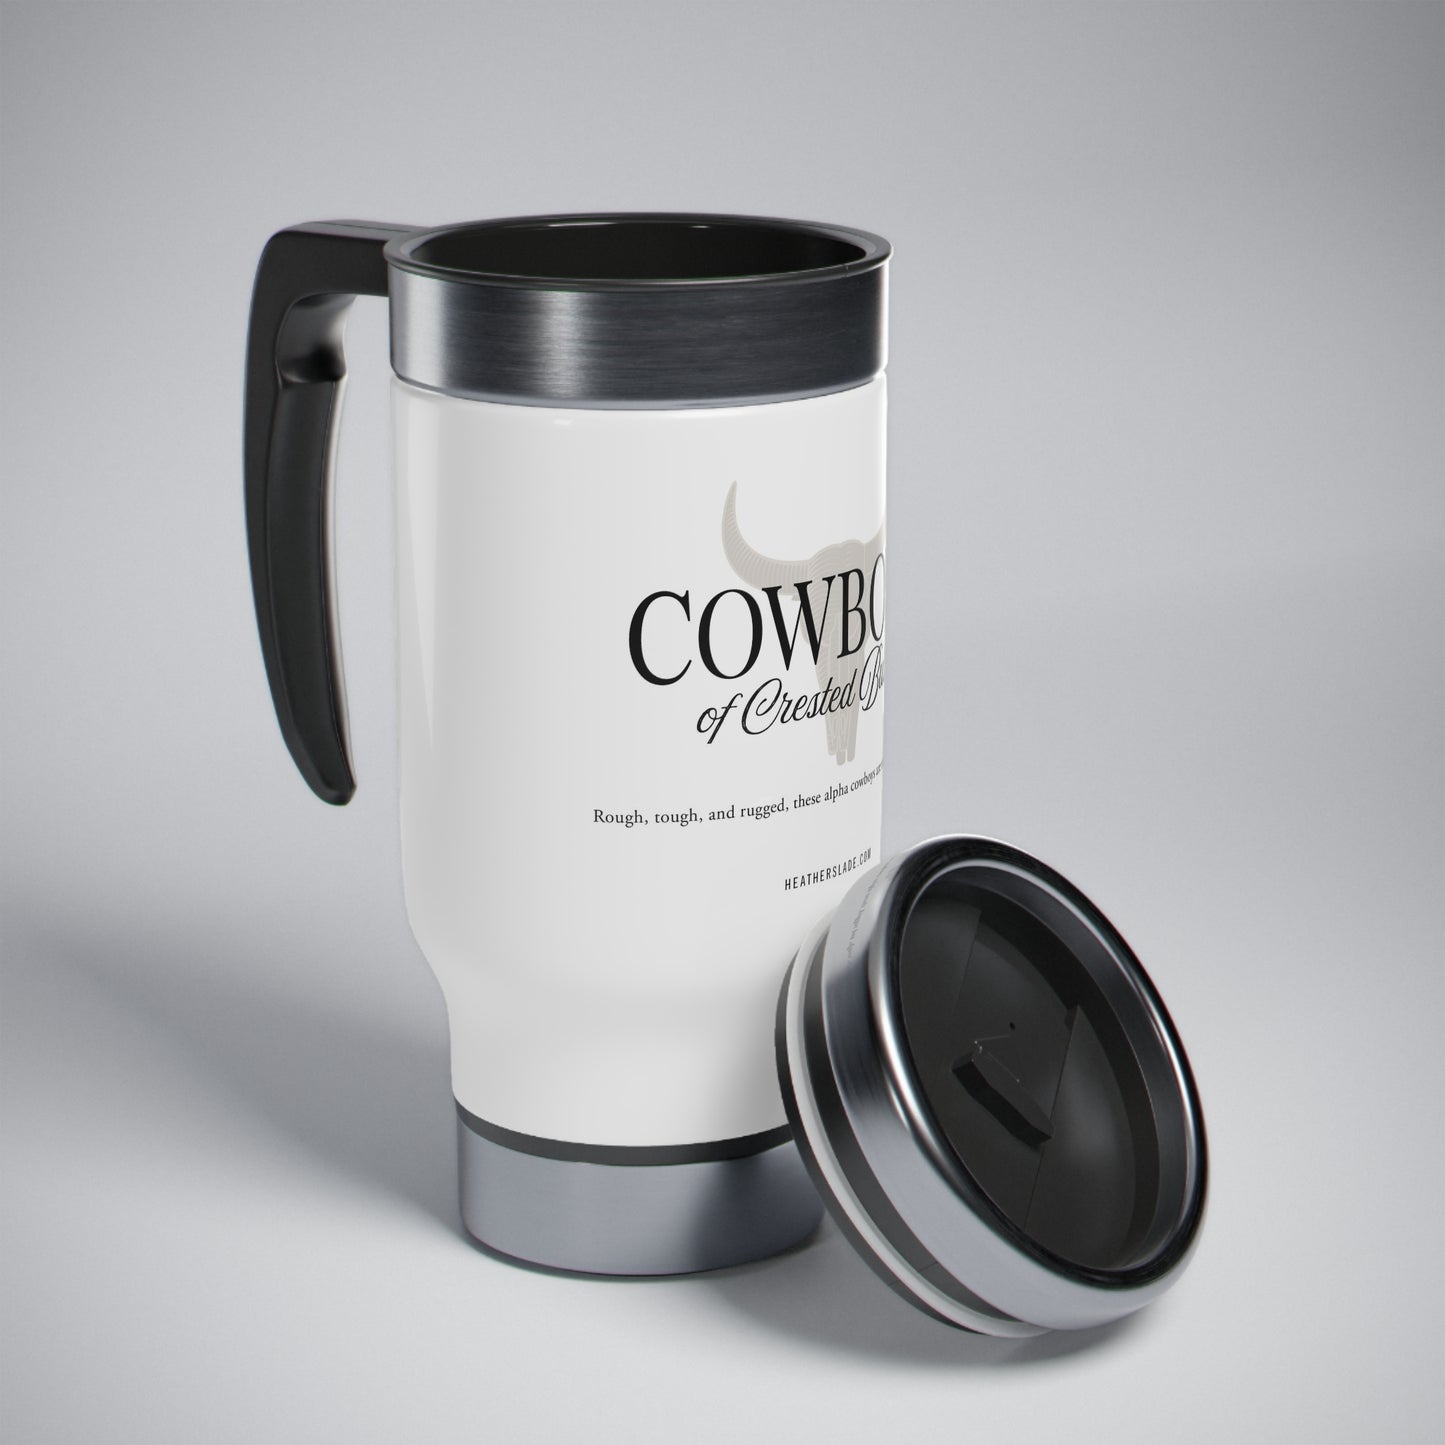 Cowboys of Crested Butte Stainless Steel Travel Mug with Handle, 14oz